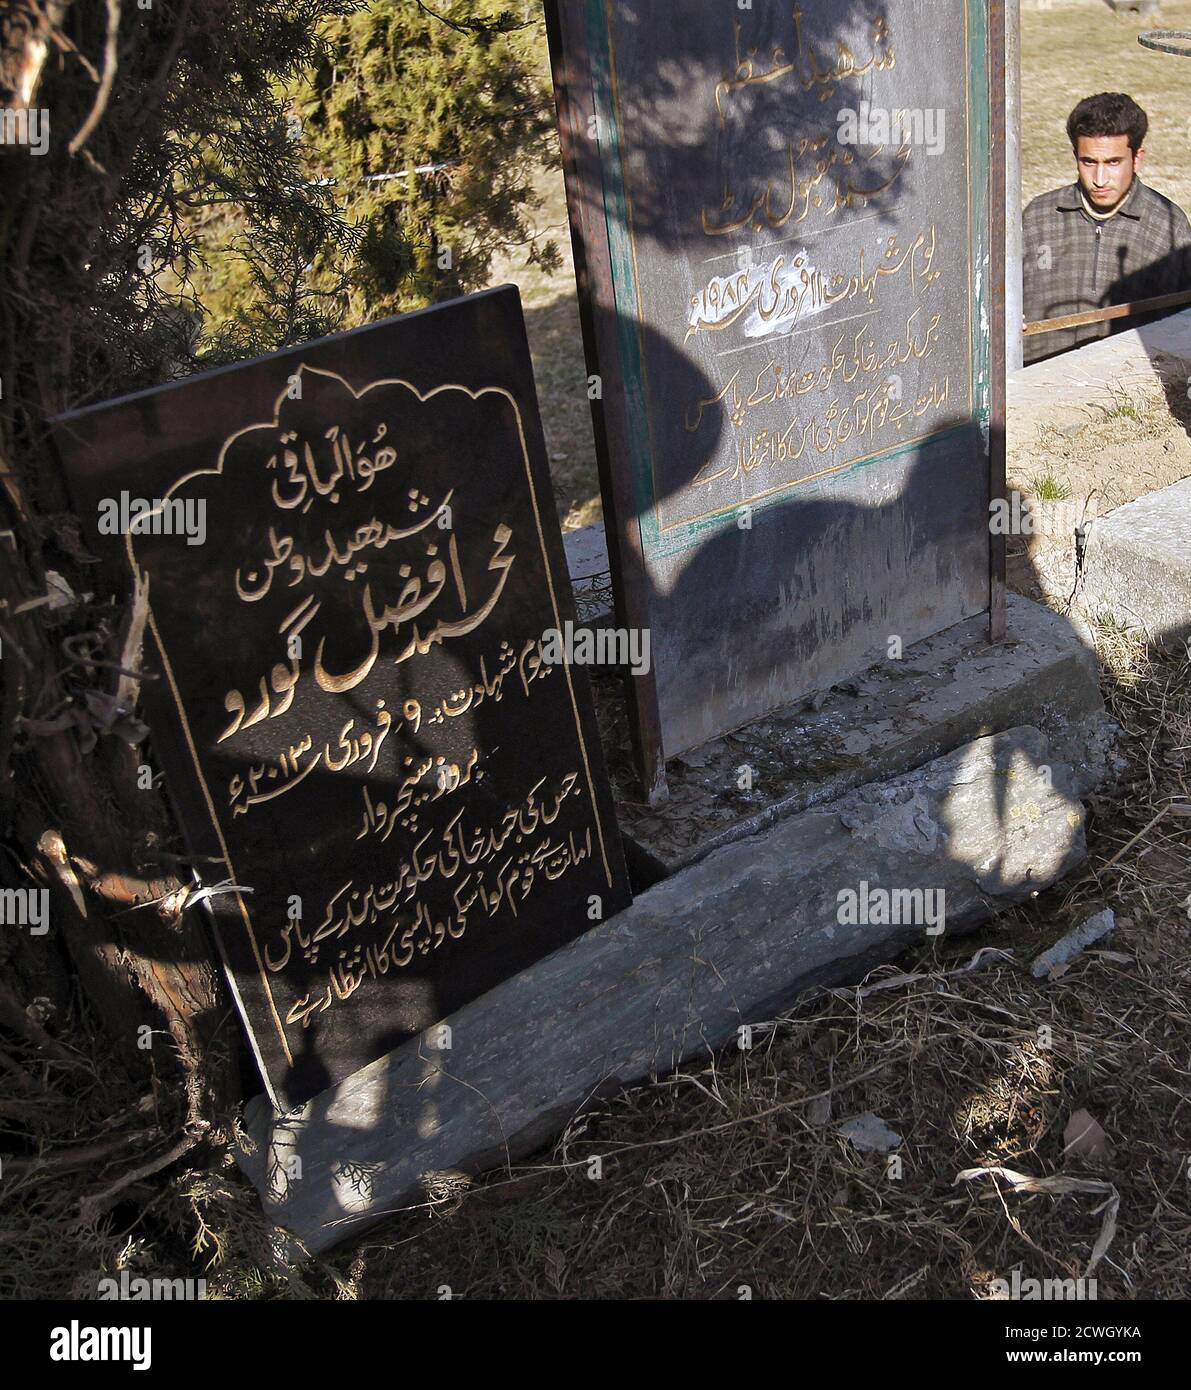 An epitaph (L) for Mohammad Afzal Guru is seen at the Mazar-e-Shohda (Martyr's graveyard) in Srinagar February 12, 2013. India hanged Mohammad Afzal Guru, a Kashmiri man, on Saturday for an attack on the country's parliament in 2001, sparking clashes in Kashmir between protesters and police. Security forces had imposed a curfew in parts of Kashmir and ordered people off the streets. The writing on the epitaph reads: "Martyr of homeland Mohammad Afzal Guru, Martyrdom date February 9, 2013, whose mortal remains are lying with the government of India and the nations is waiting for its return". RE Stock Photo